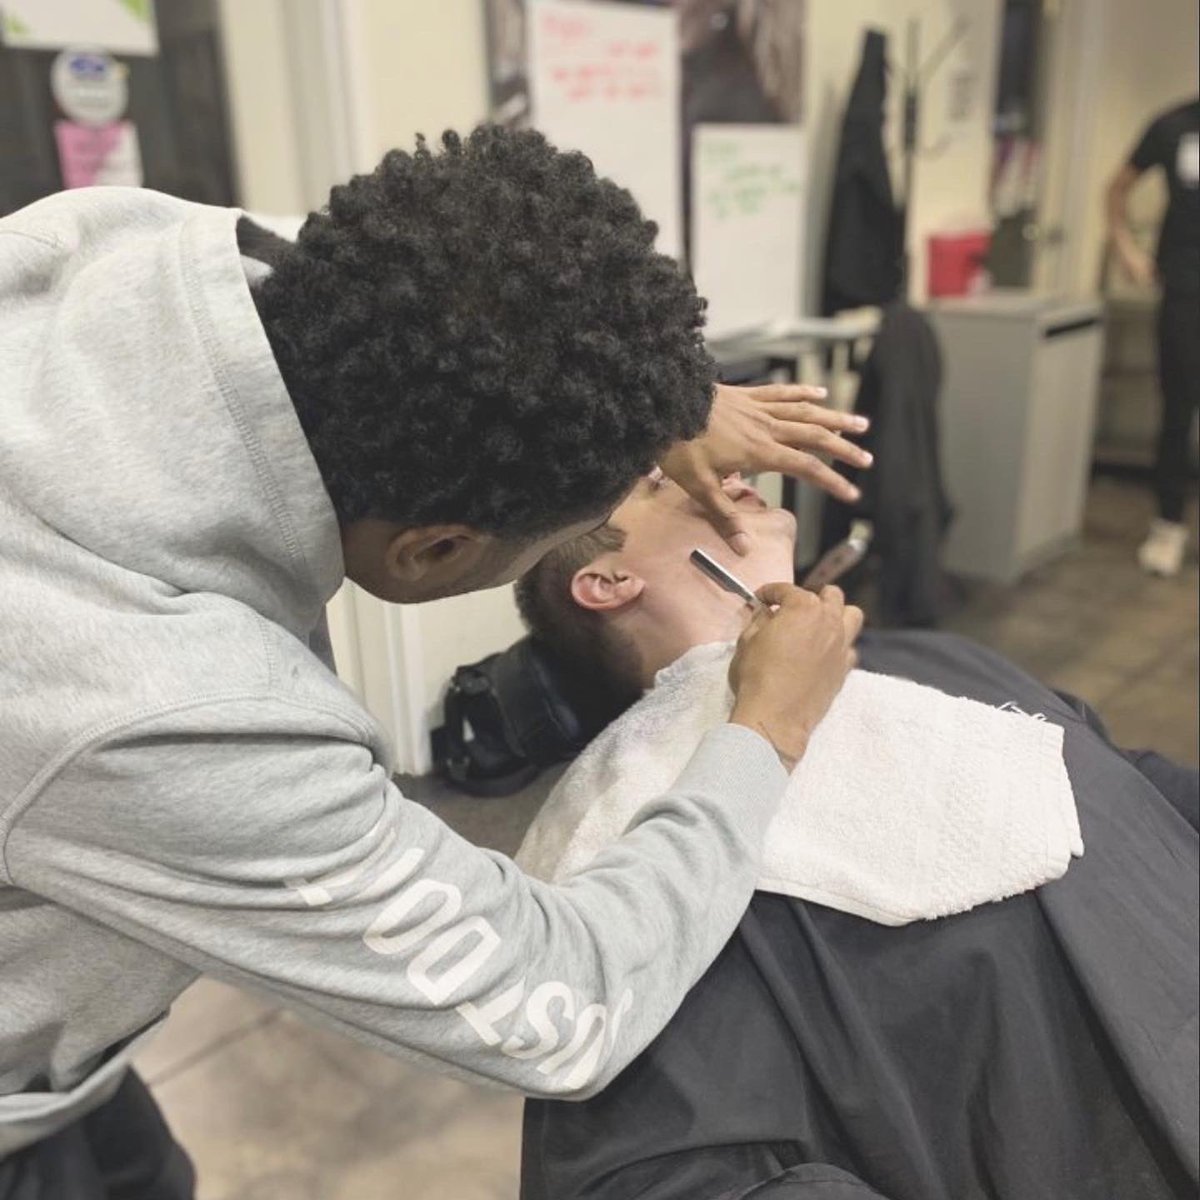 #hairstyle #hairstyle Barber in action 💥 📸: @blessed.byzay .
.
.
#pmtsnorman #pmtslife #barber 
via DMTBarberShop.com Barber.Tube, DMTBarberShop #hairsalon via dmtbeautyspot.net/post/671204610…